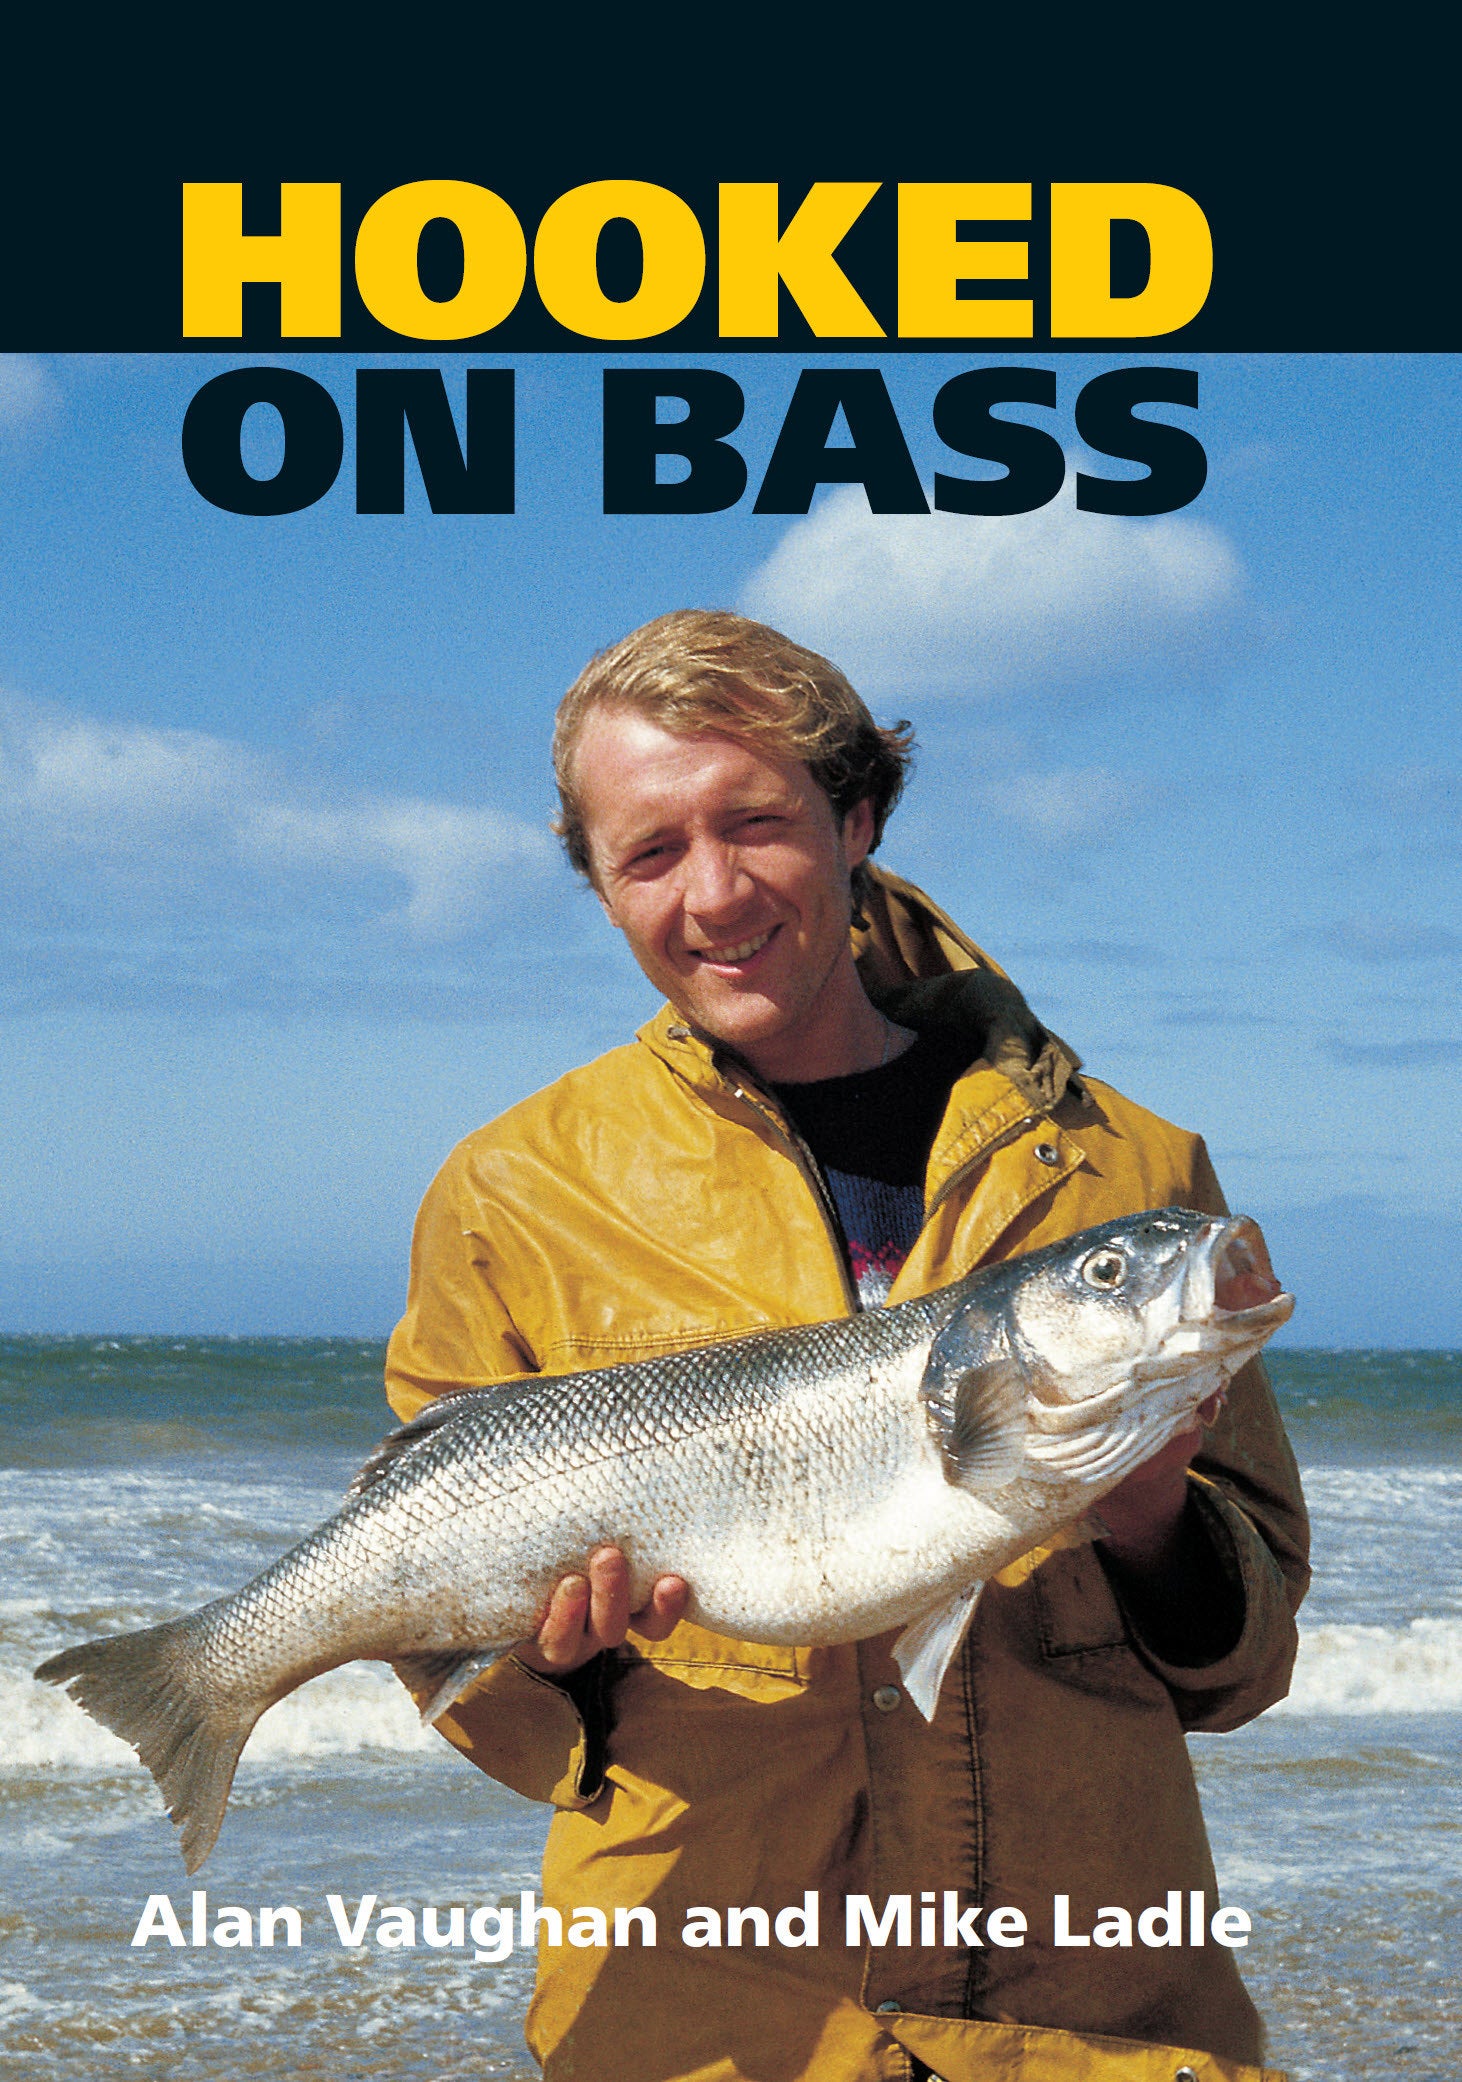 Bass Fishing on Shore and Sea - The Crowood Press